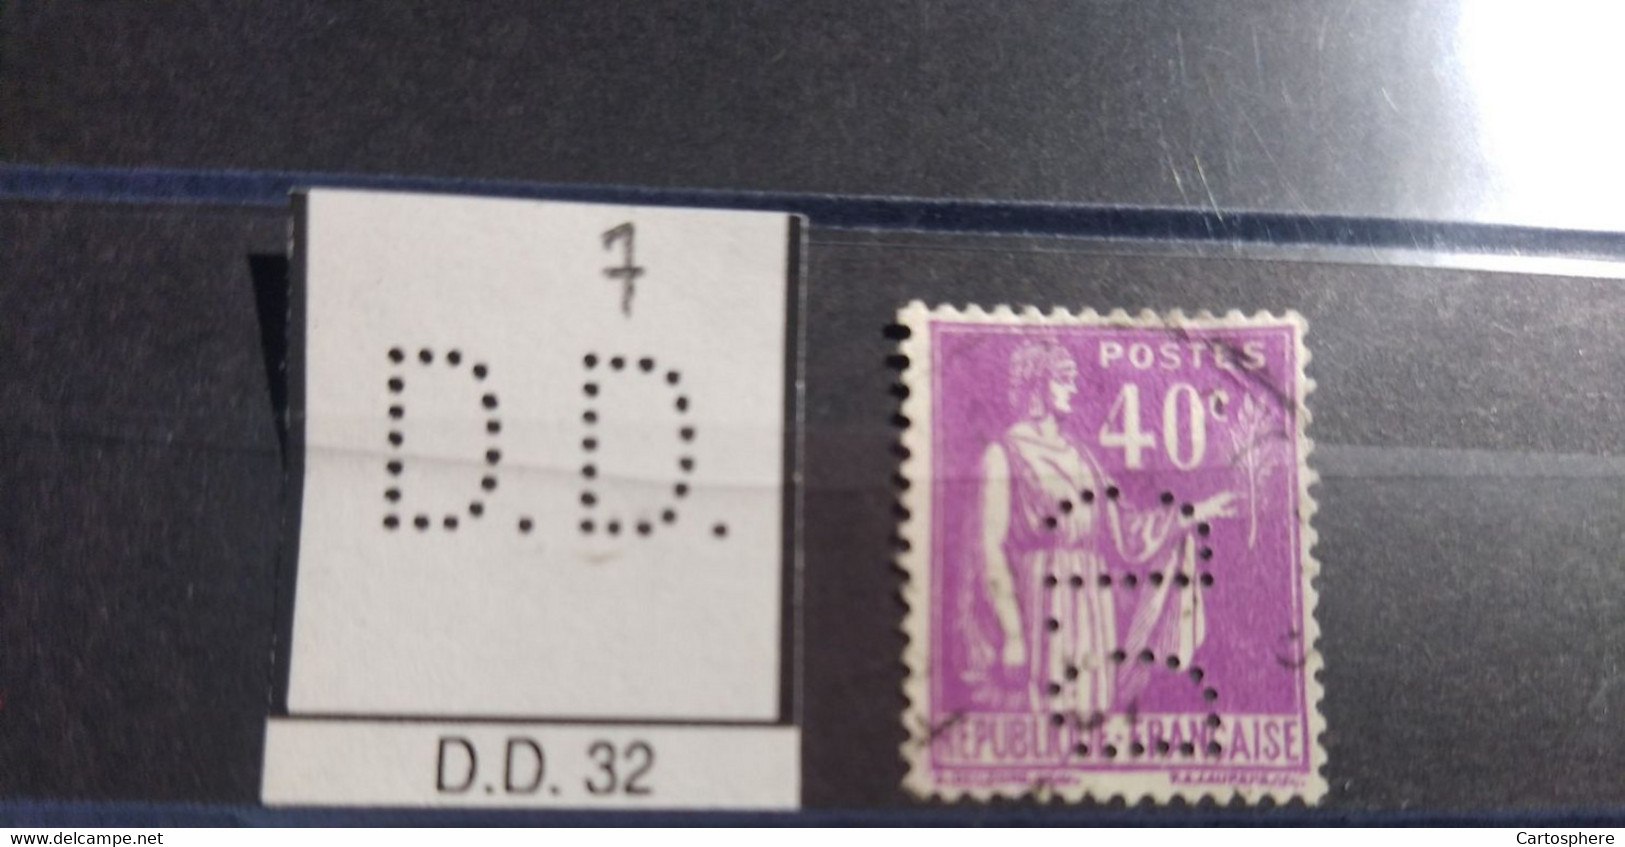 FRANCE D.D 32 TIMBRE DD32 INDICE 5  SUR PAIX PERFORE PERFORES PERFIN PERFINS PERFO PERFORATION PERFORIERT - Used Stamps